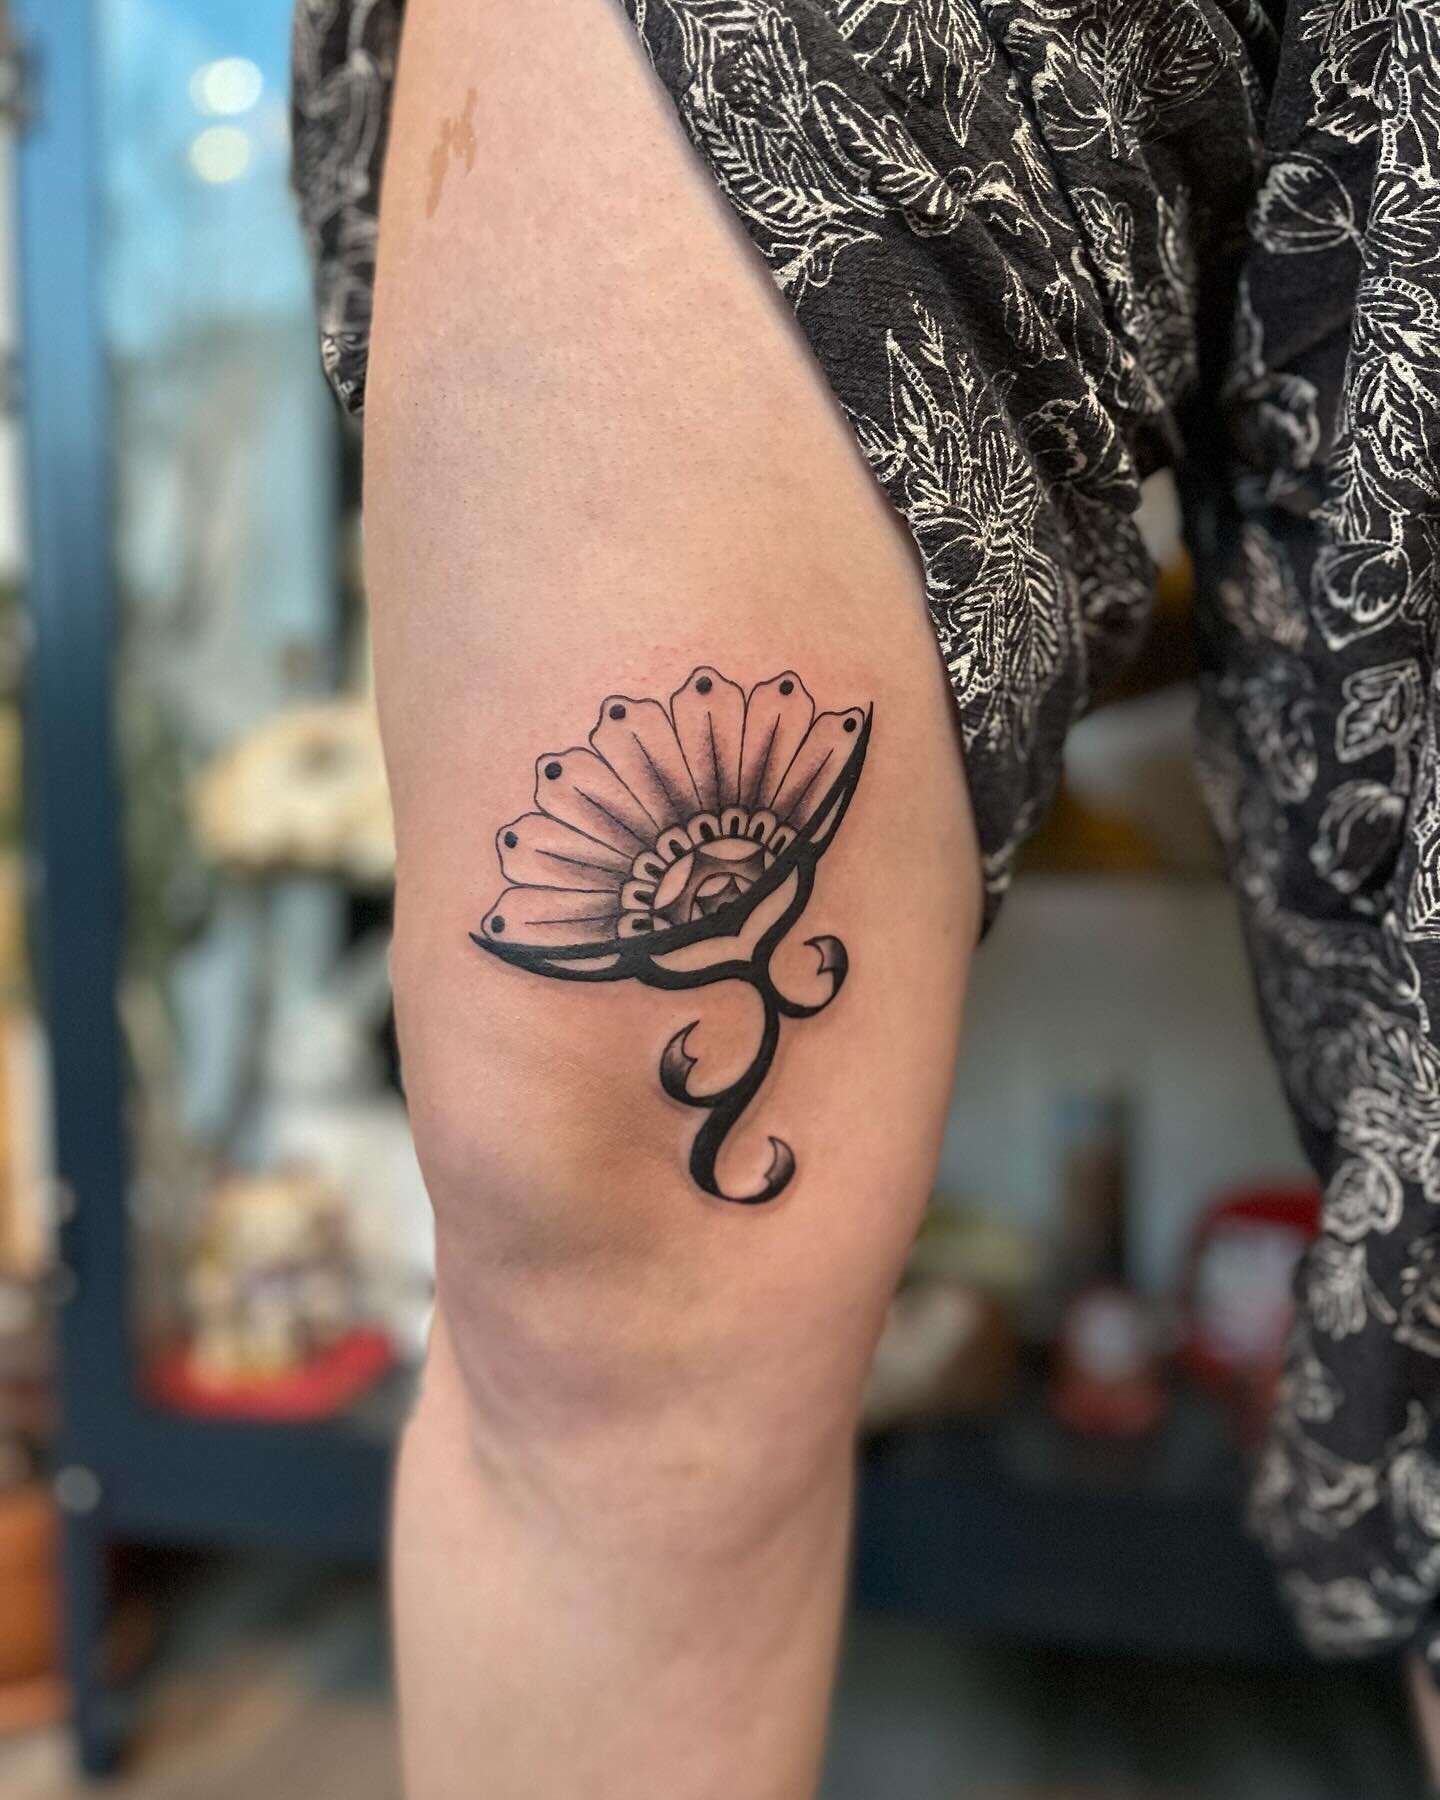 Another sweet flower flash for @goldlilo 🌸 thanks for looking! 
.
.
.
.
.
.
.
.
.
#apprentice #apprenticetattoo #tattooapprentice #kneebanger #flowertattoo #bostontattoo #jamaicaplain